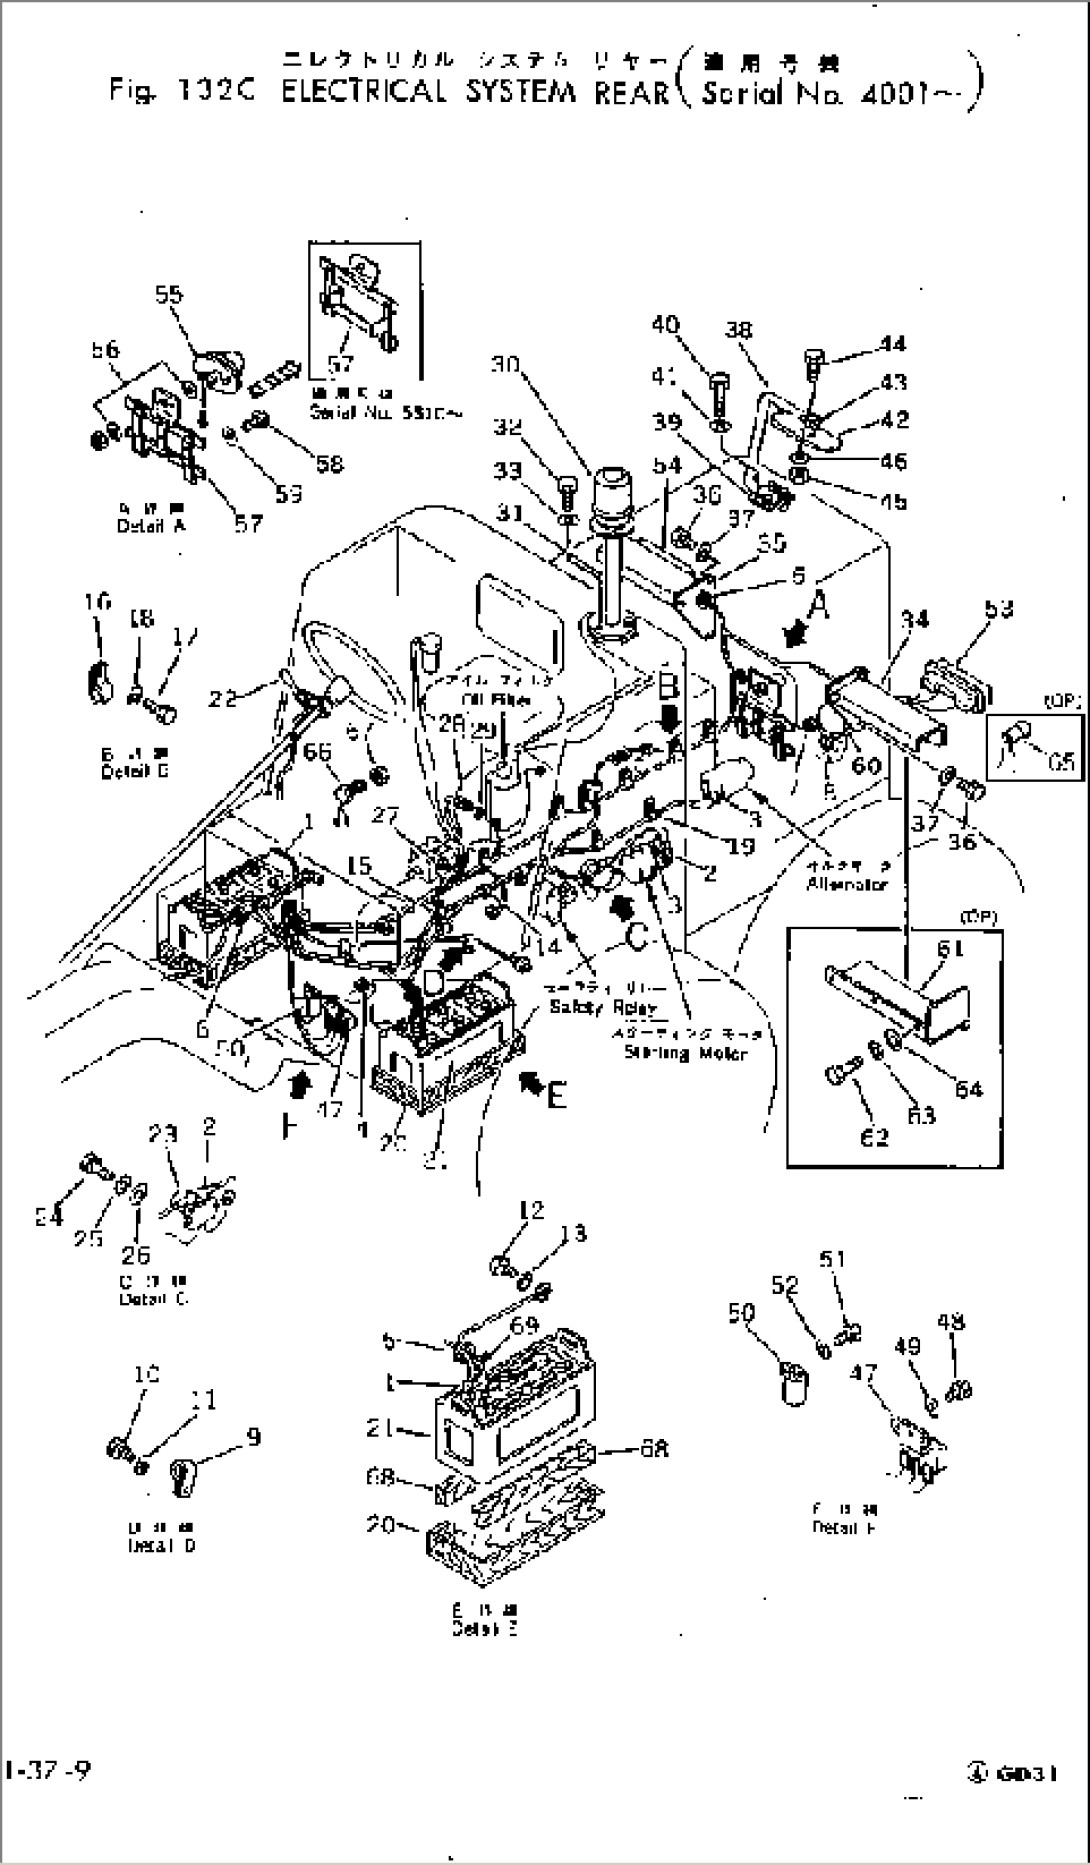 ELECTRICAL SYSTEM (REAR(